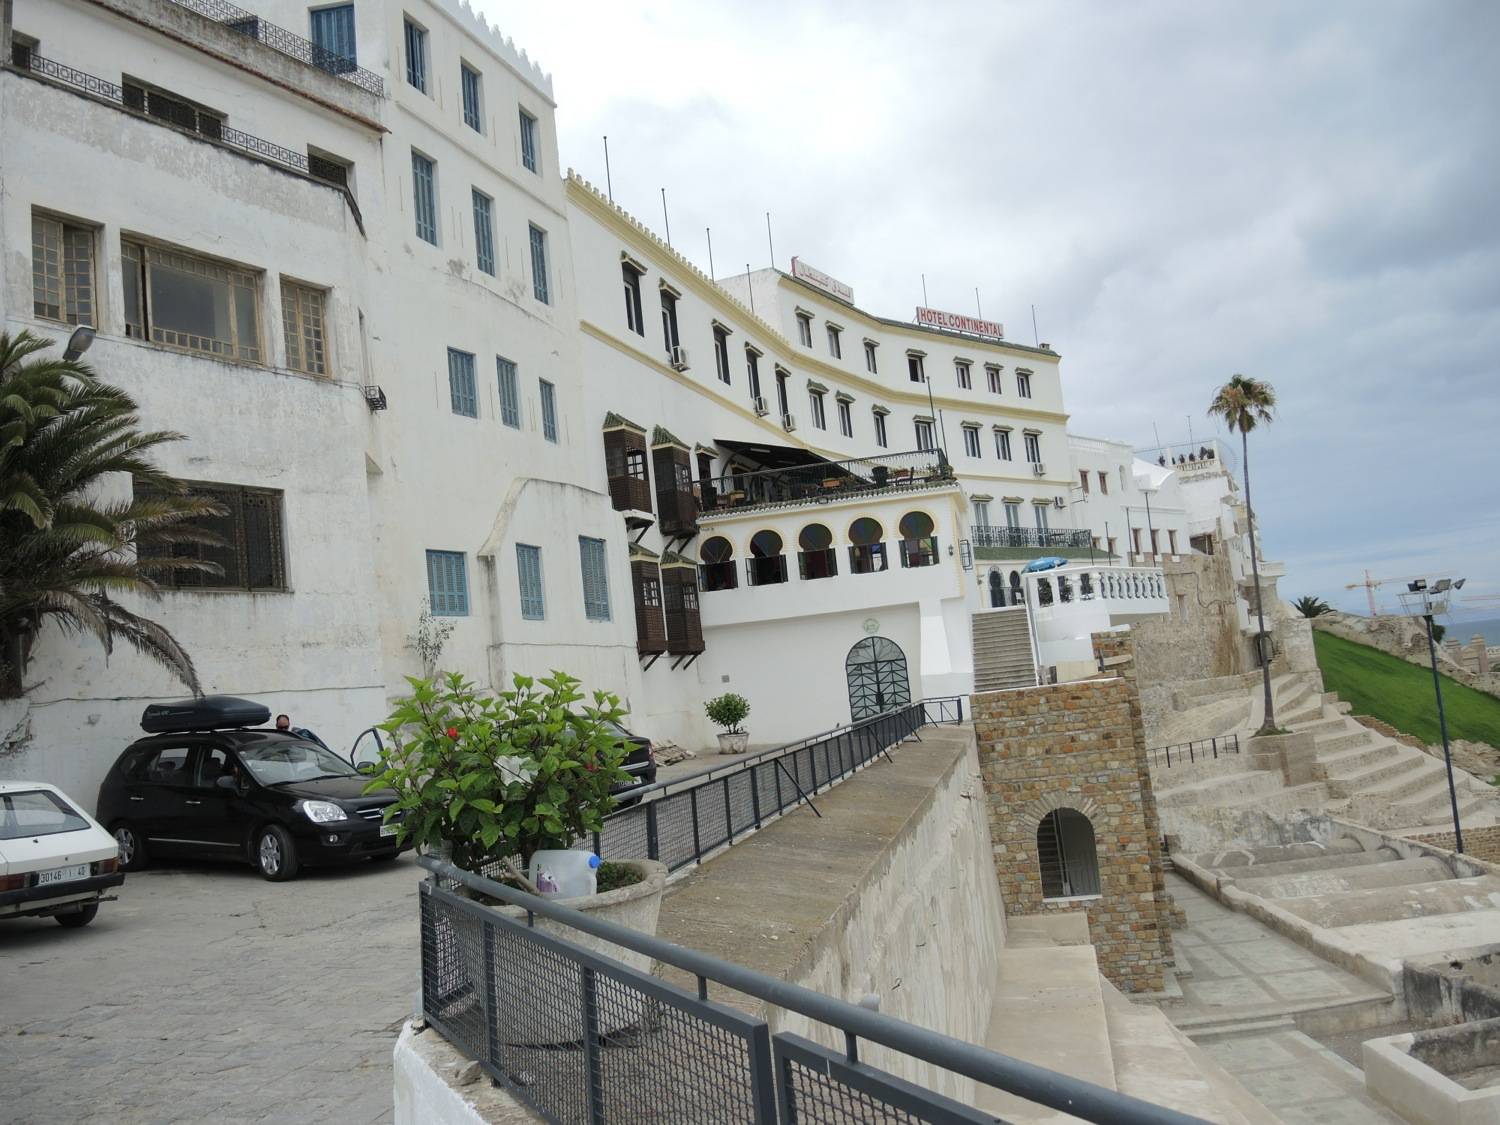 Exterior view, Hotel Continental and parking.  The canon battery was once located along where the railing now is.